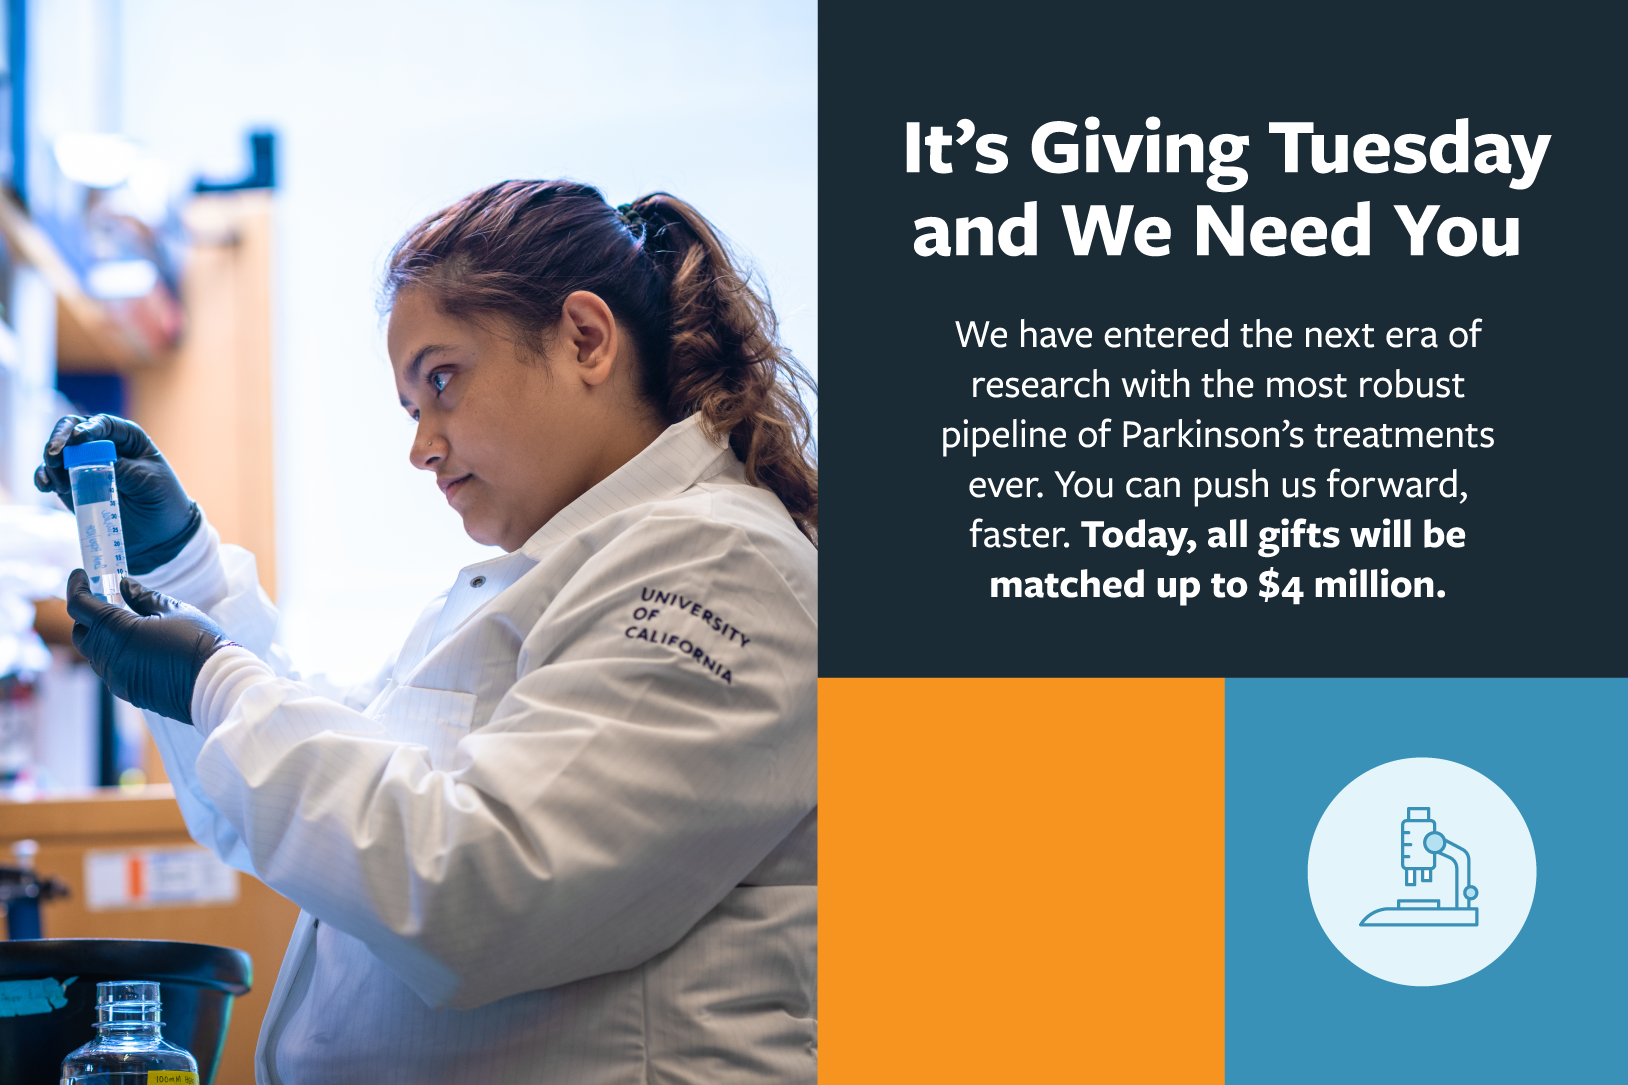 It's Giving Tuesday and We Need You. We have entered the next era of research with the most robust pipeline of Parkinson's treatments ever. You can push us forward, faster. Today, all gifts will be matched up to $4 million.